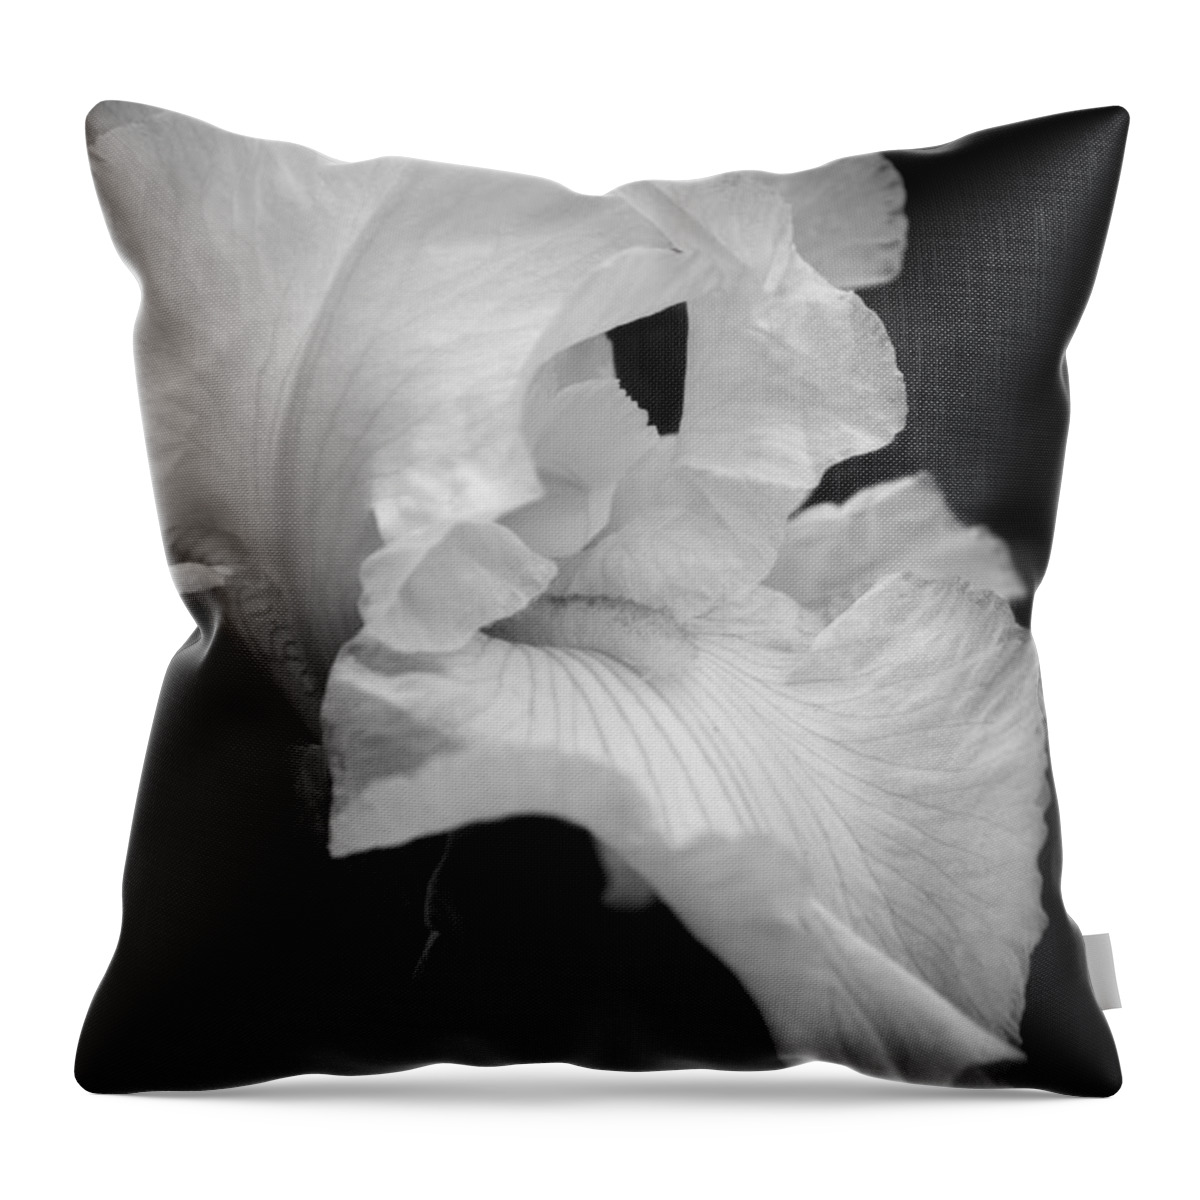 Monochrome Throw Pillow featuring the photograph White Iris by Cheryl Day